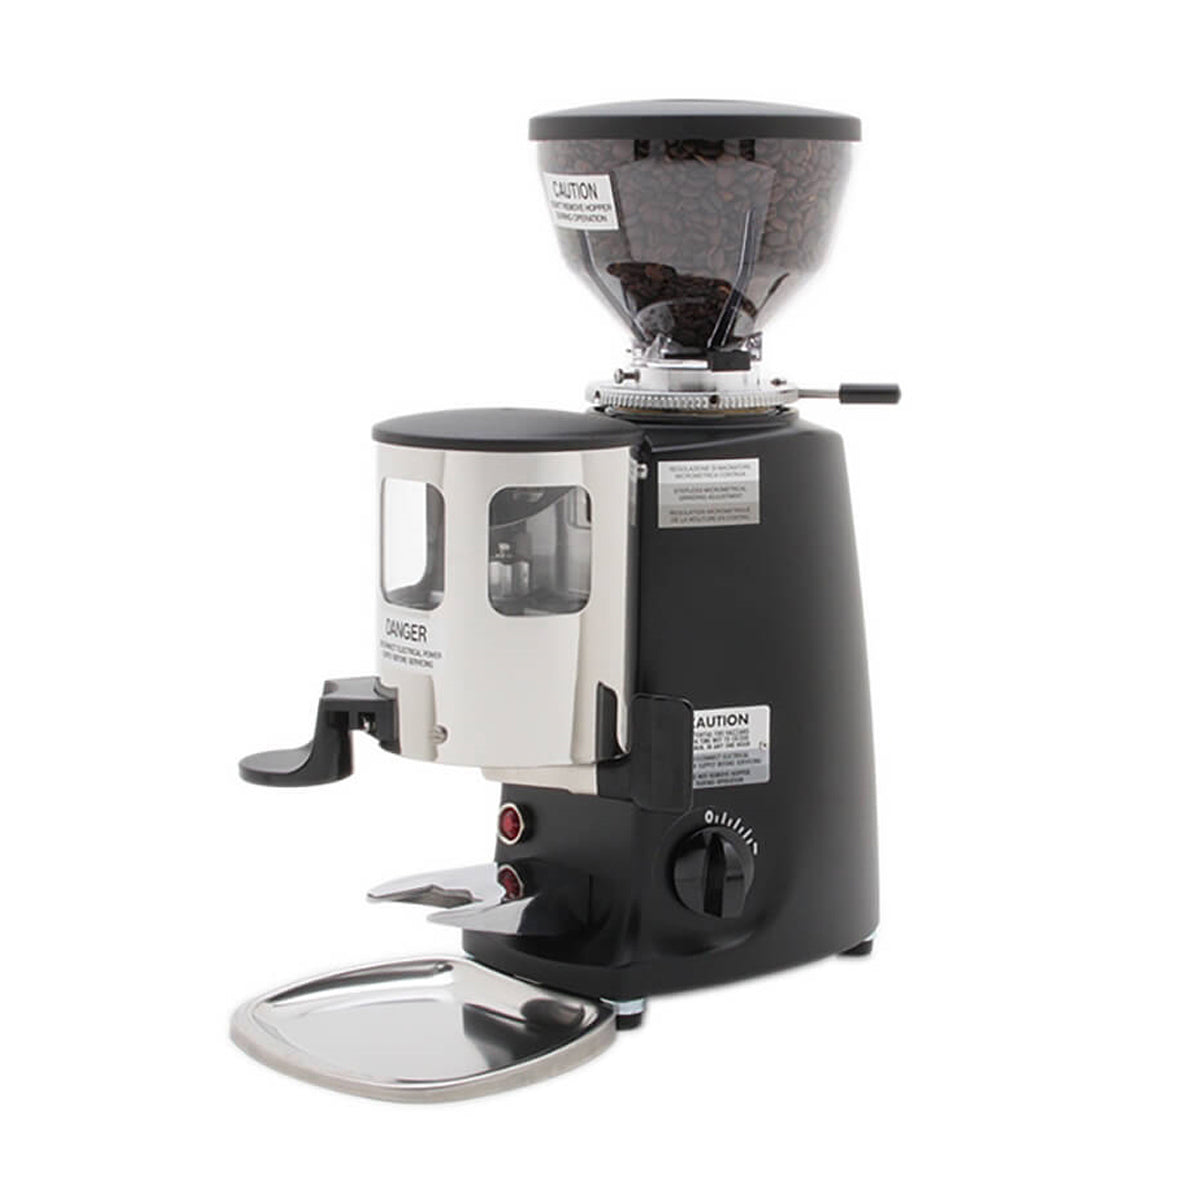 MAZZER MINI A - YOUR COMPACT SIZED COMMERCIAL COFFEE GRINDER